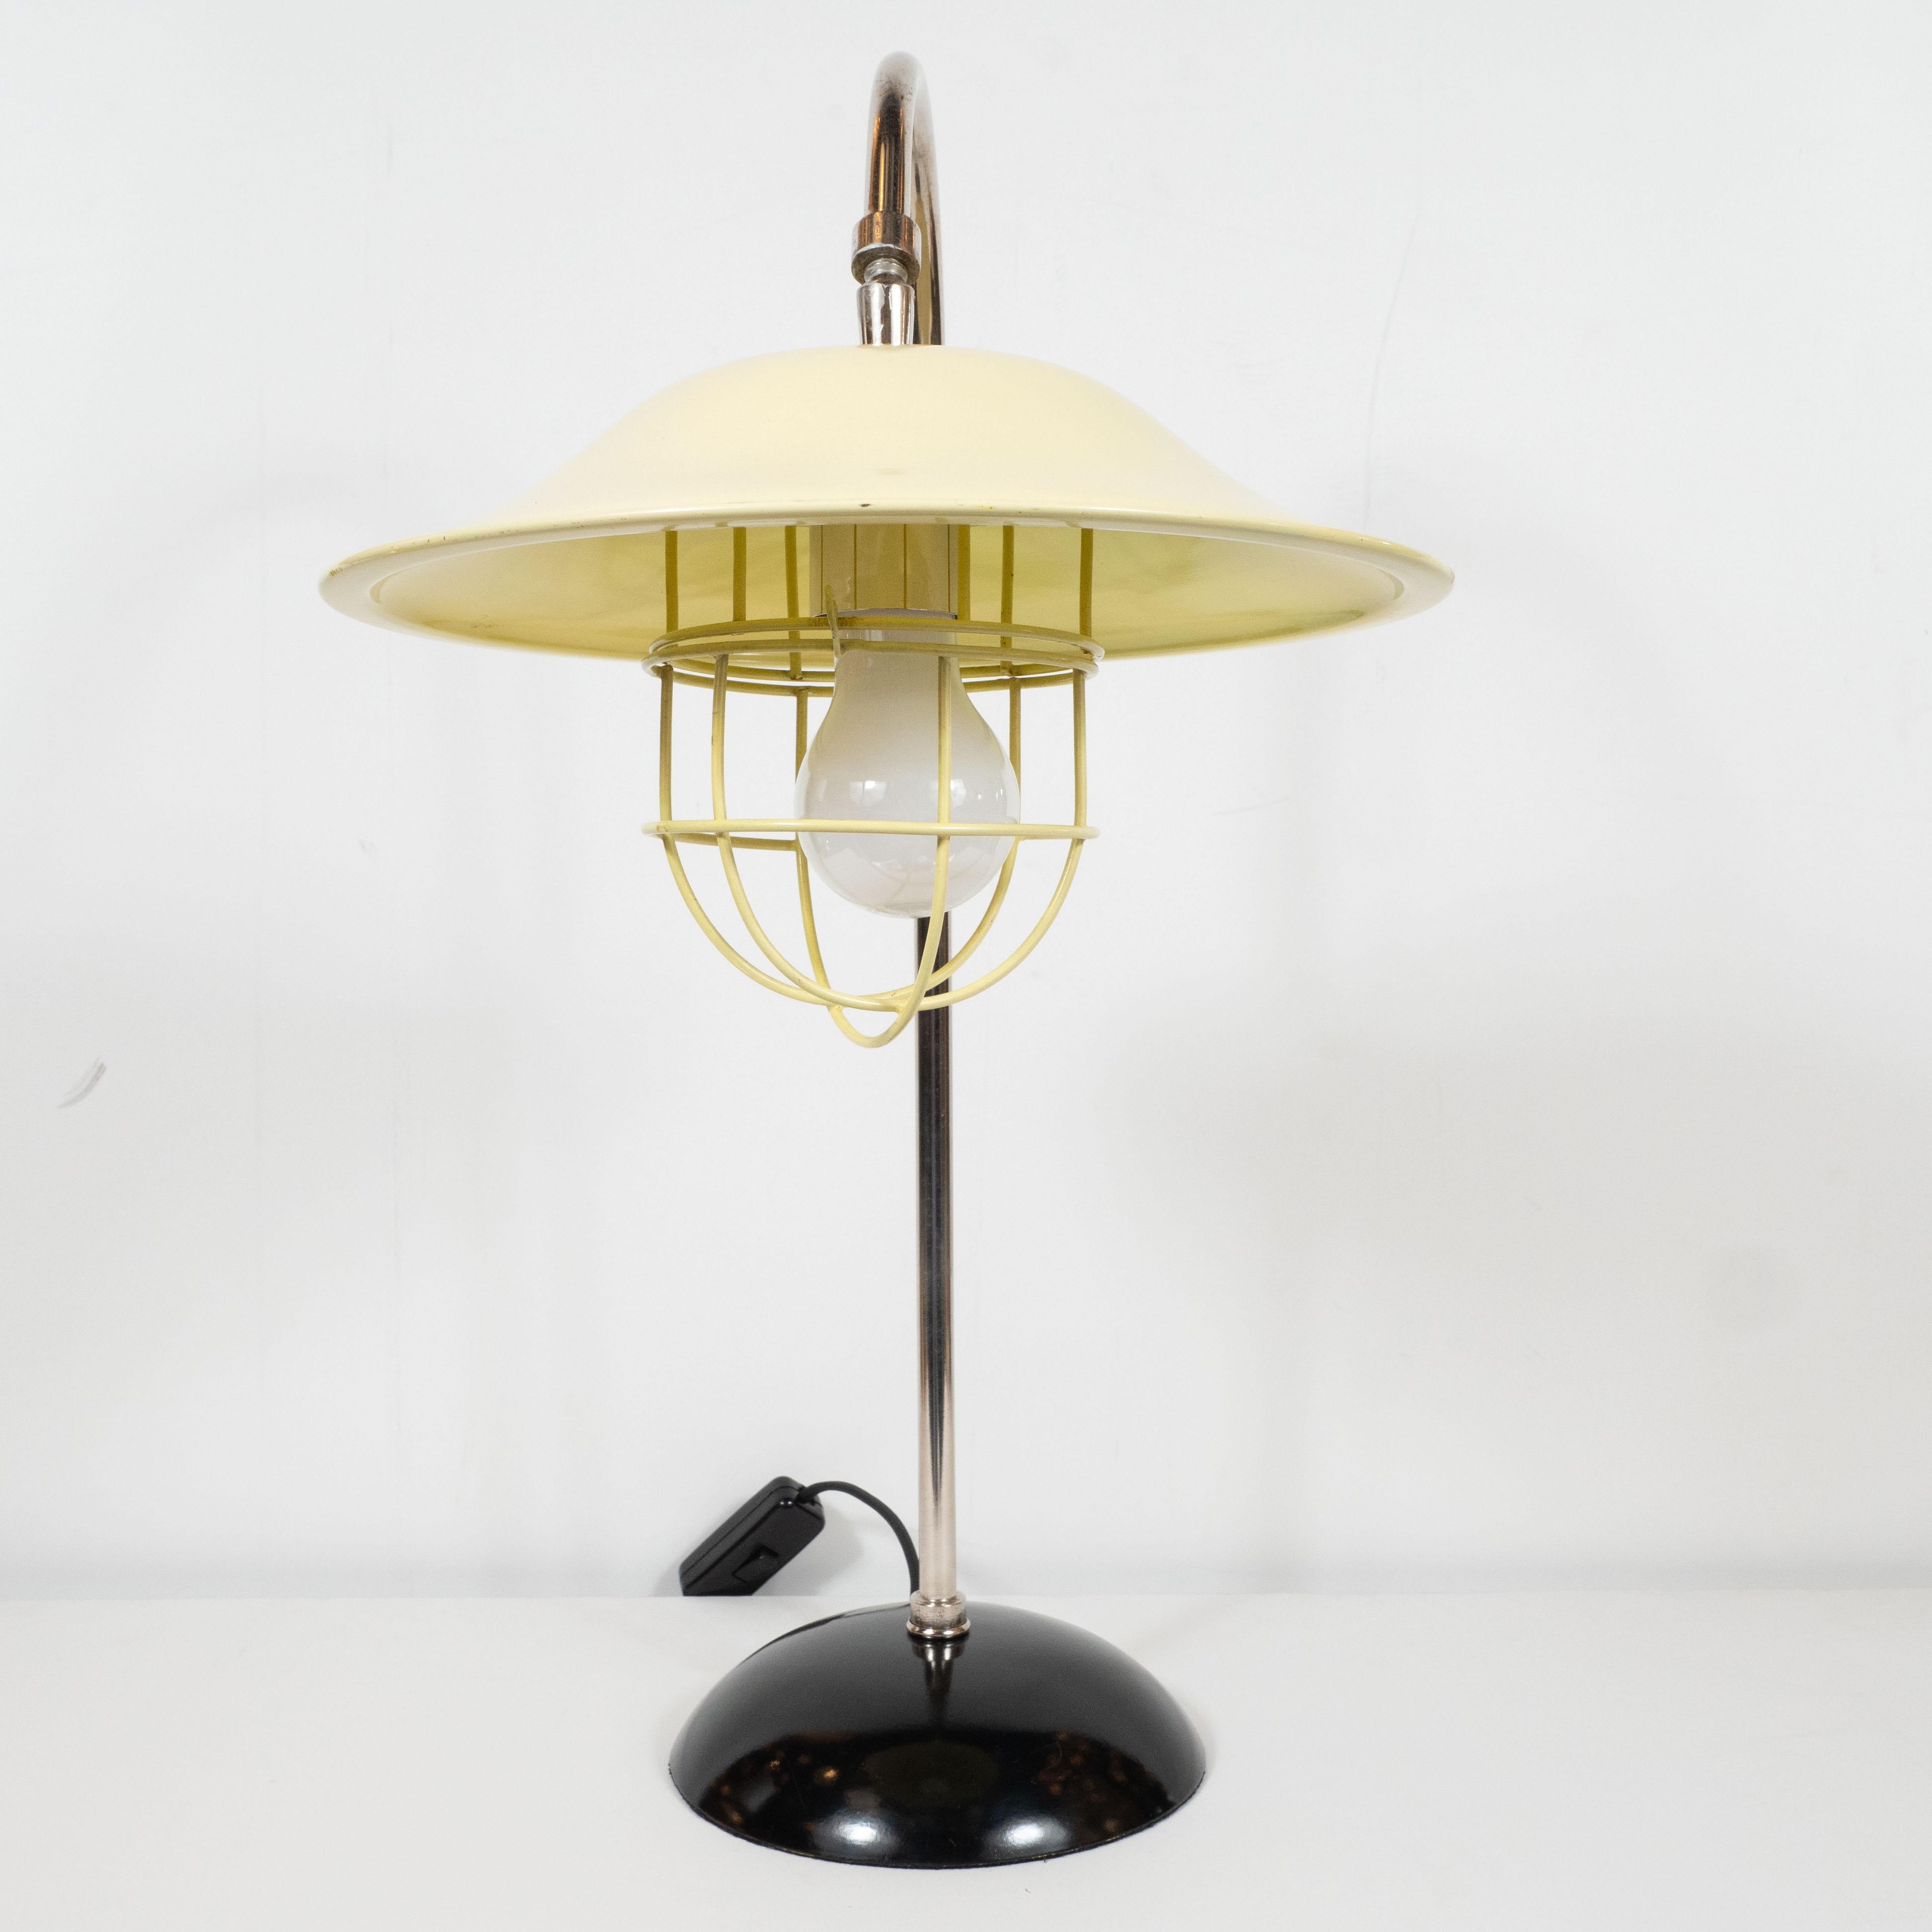 French Mid-Century Modern Chrome and Lemon Cream and Black Enamel Table Lamp For Sale 1